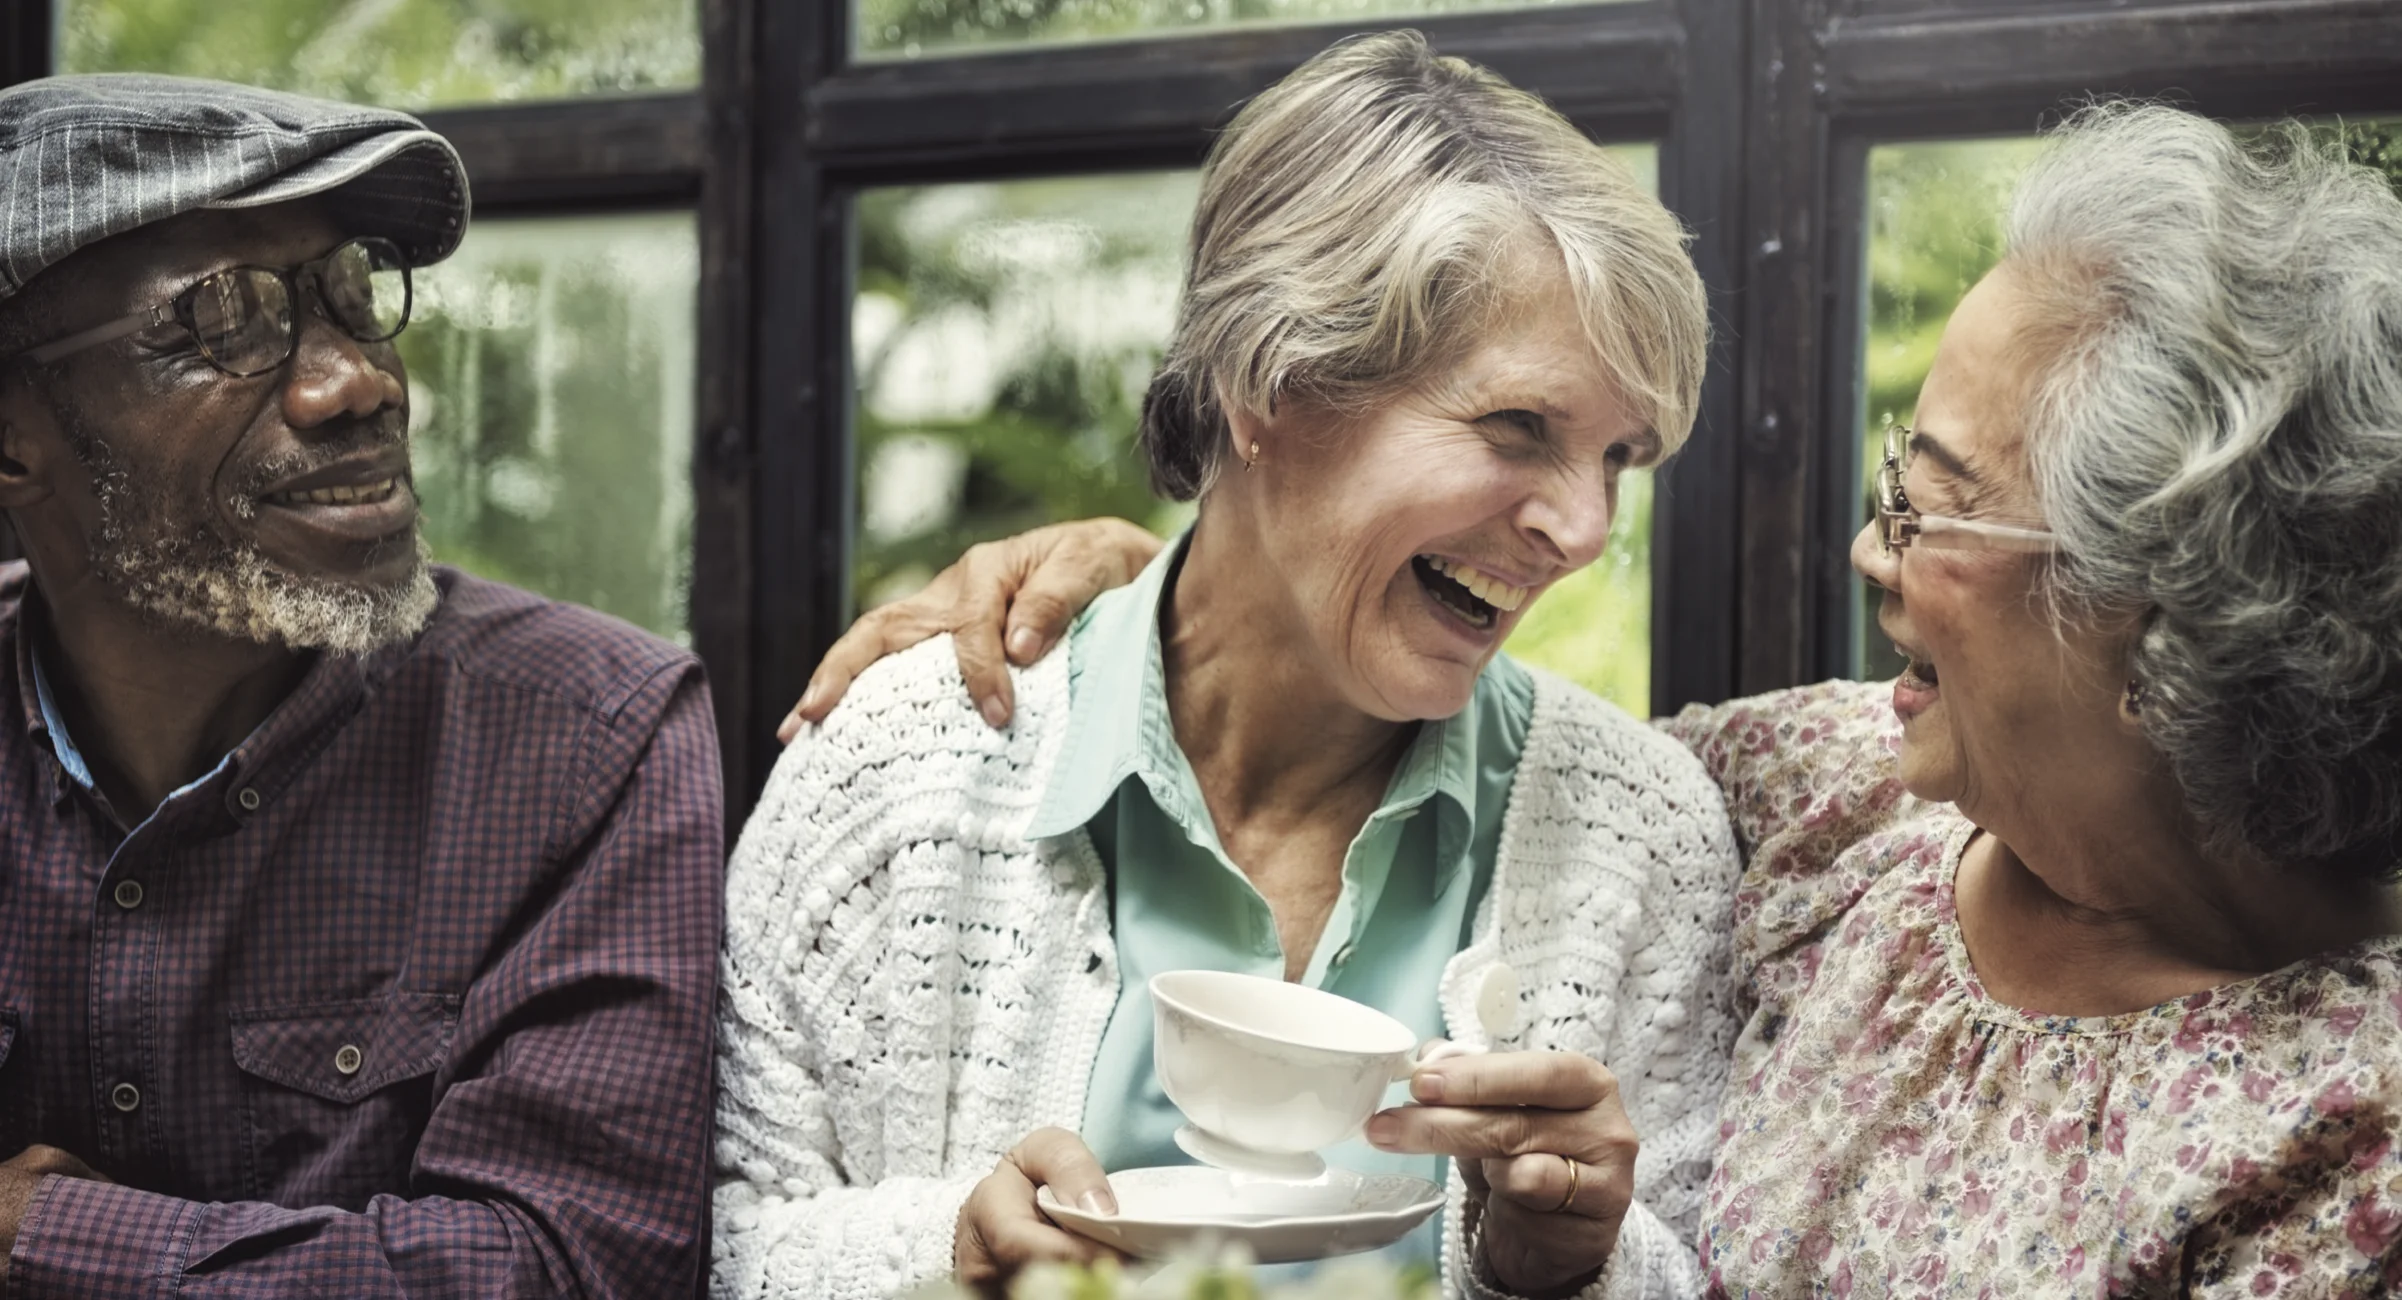 Smiling elderly with a cup of tea